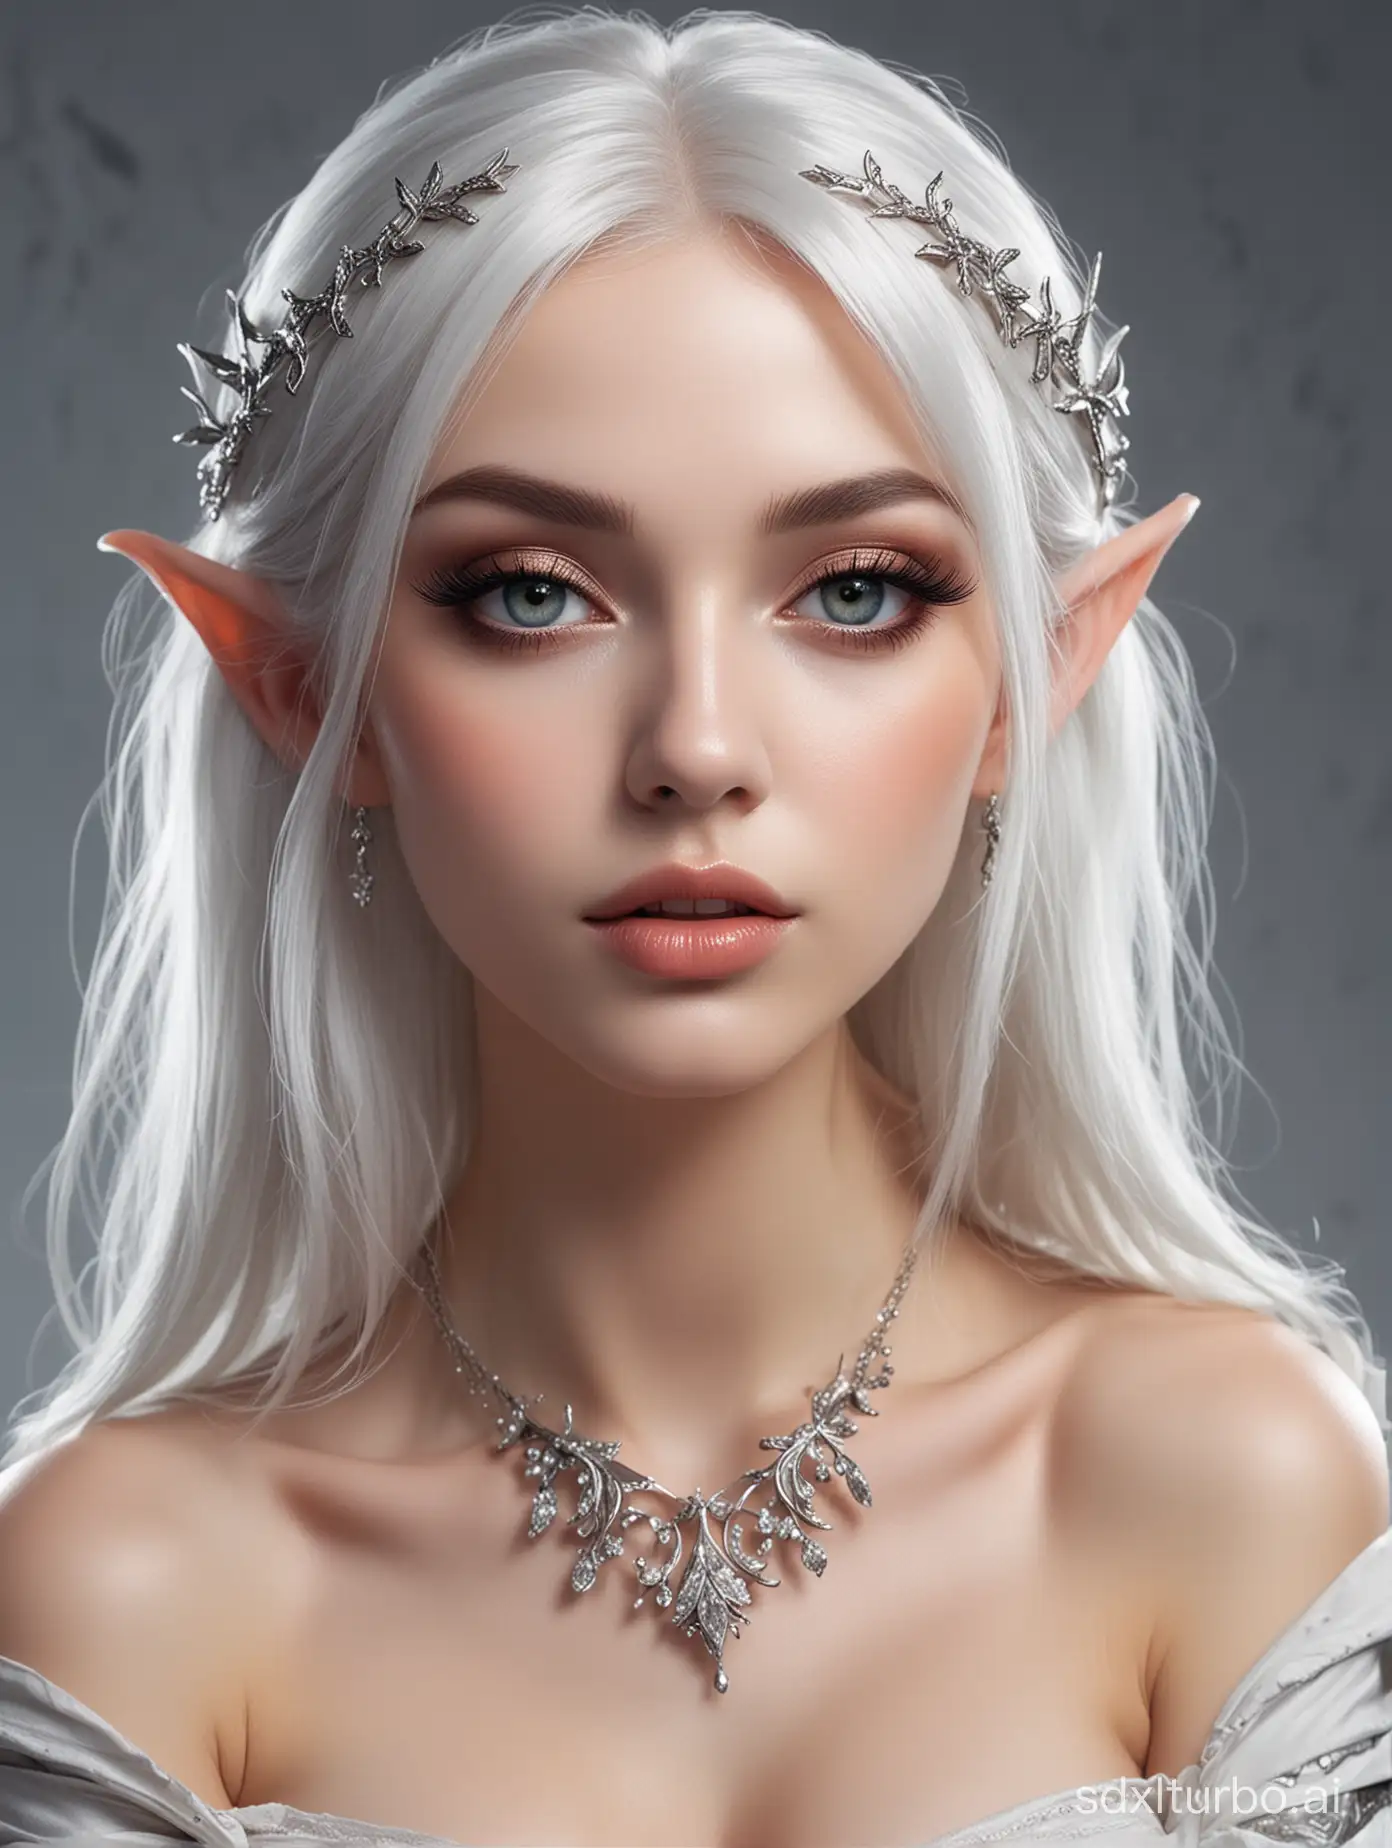 Ethereal-WhiteHaired-Elf-with-Captivating-Gaze-and-Subtle-Glamour